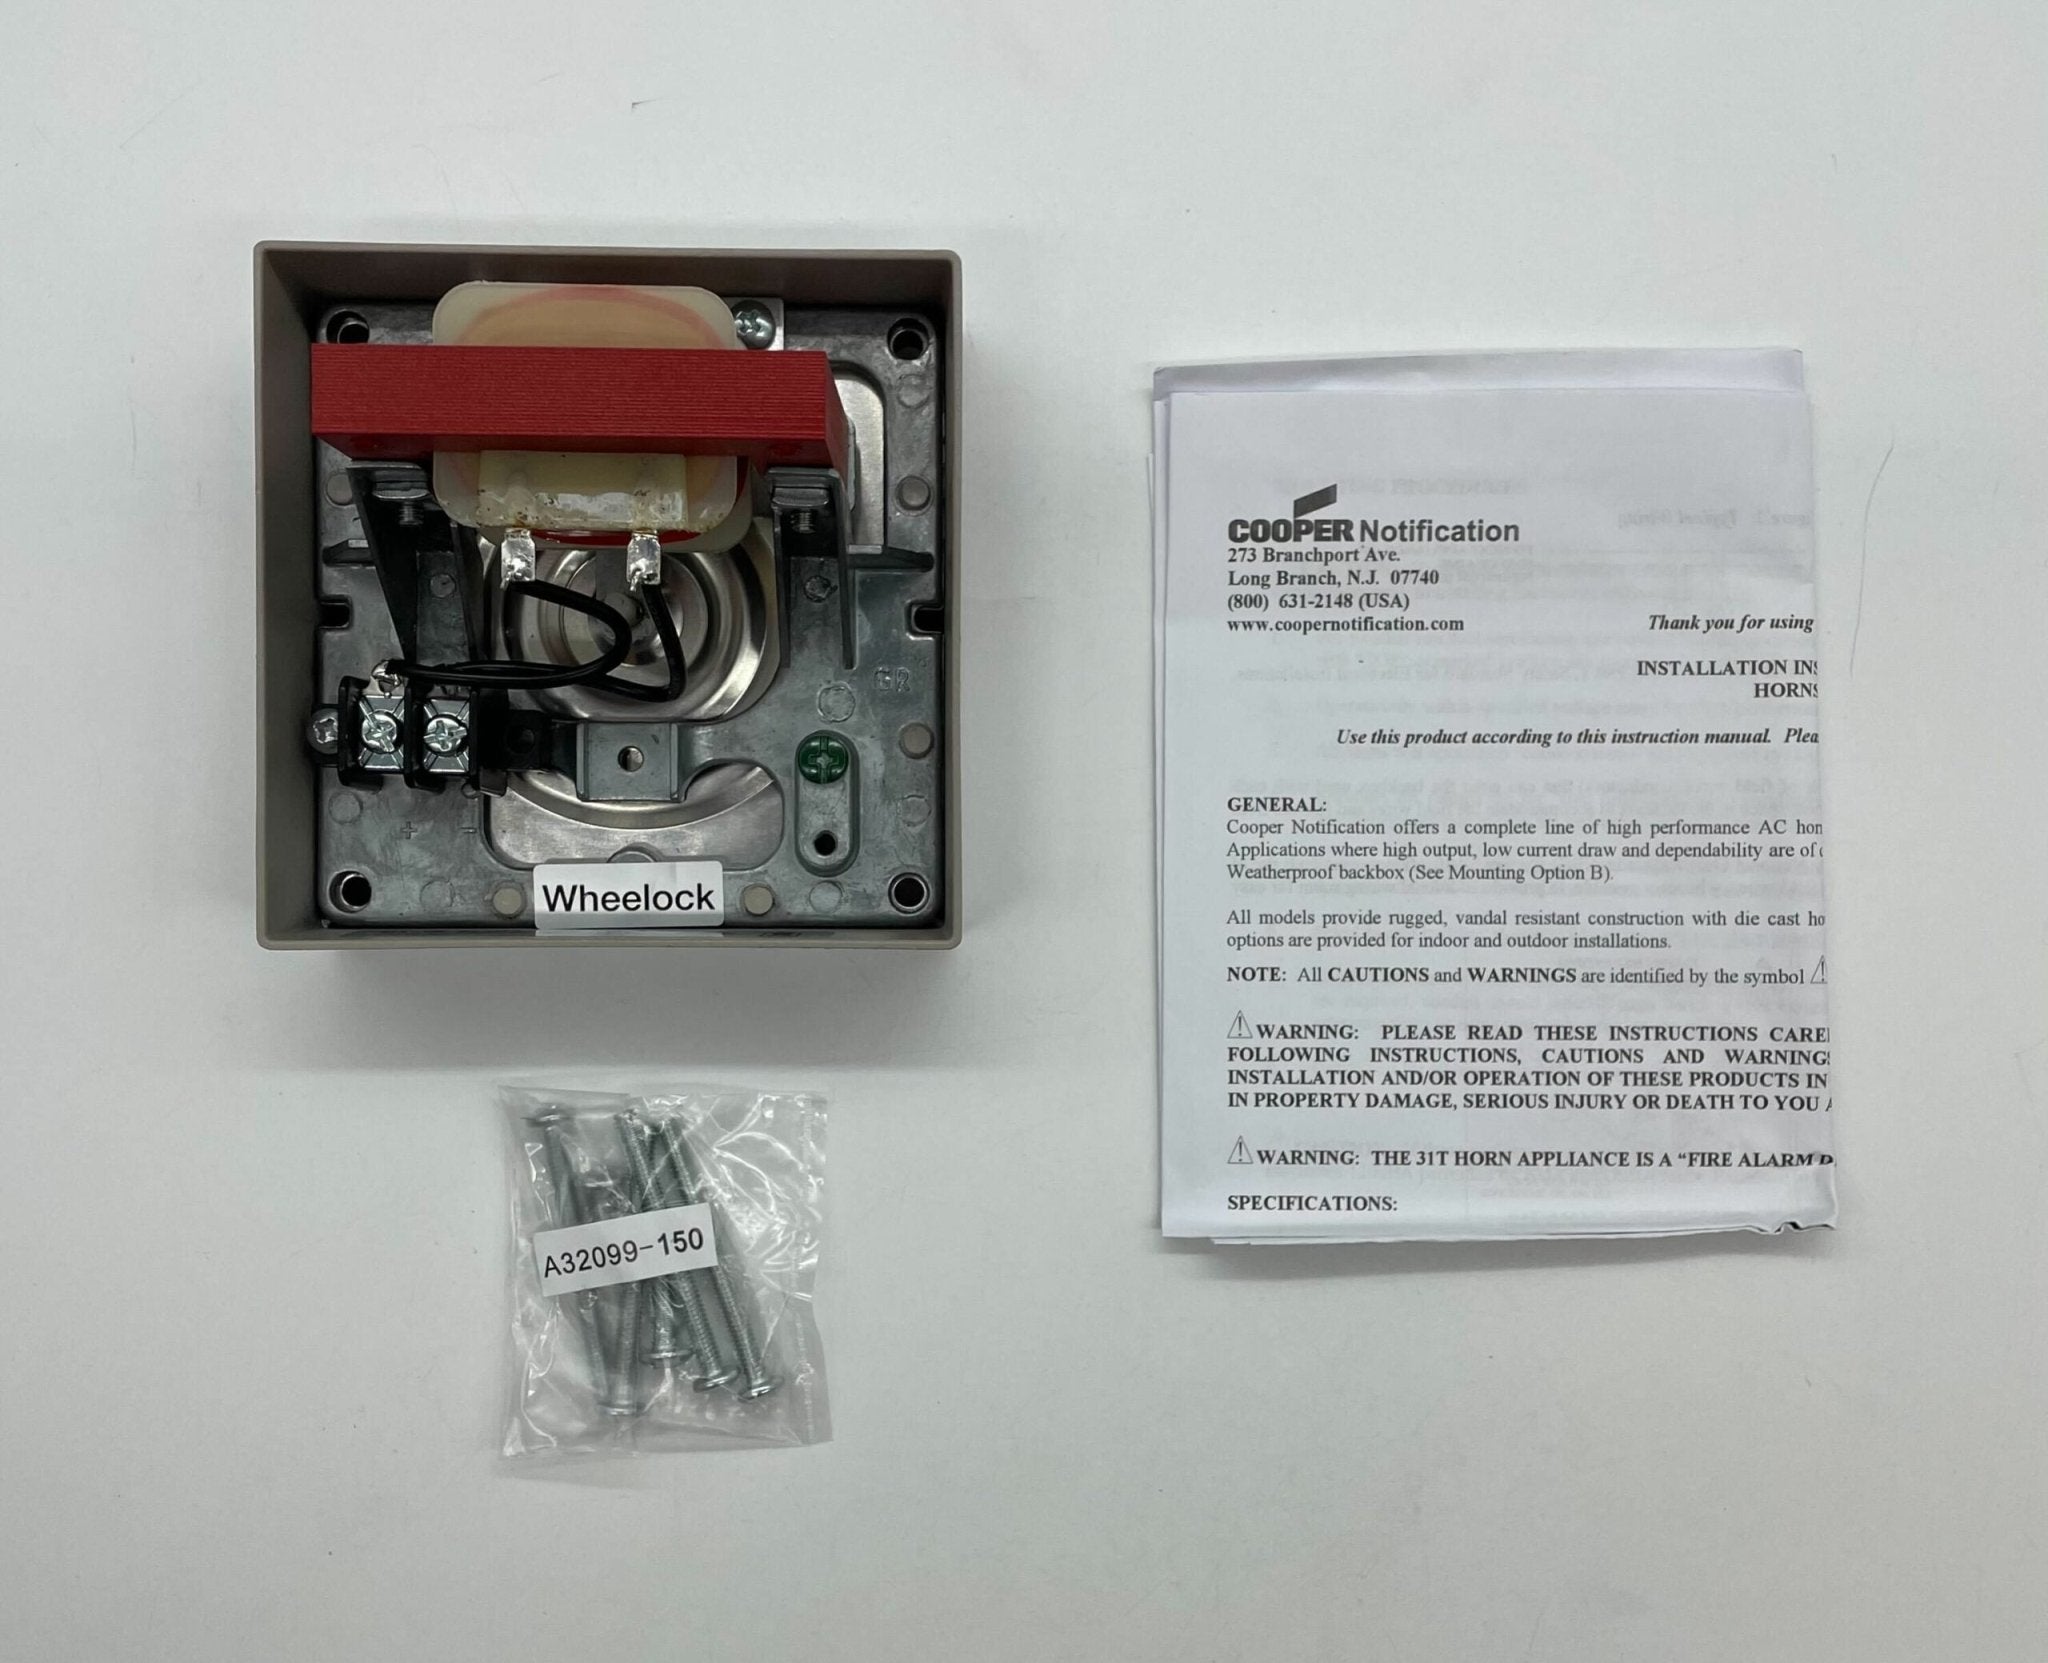 Wheelock 31T-115-S - The Fire Alarm Supplier